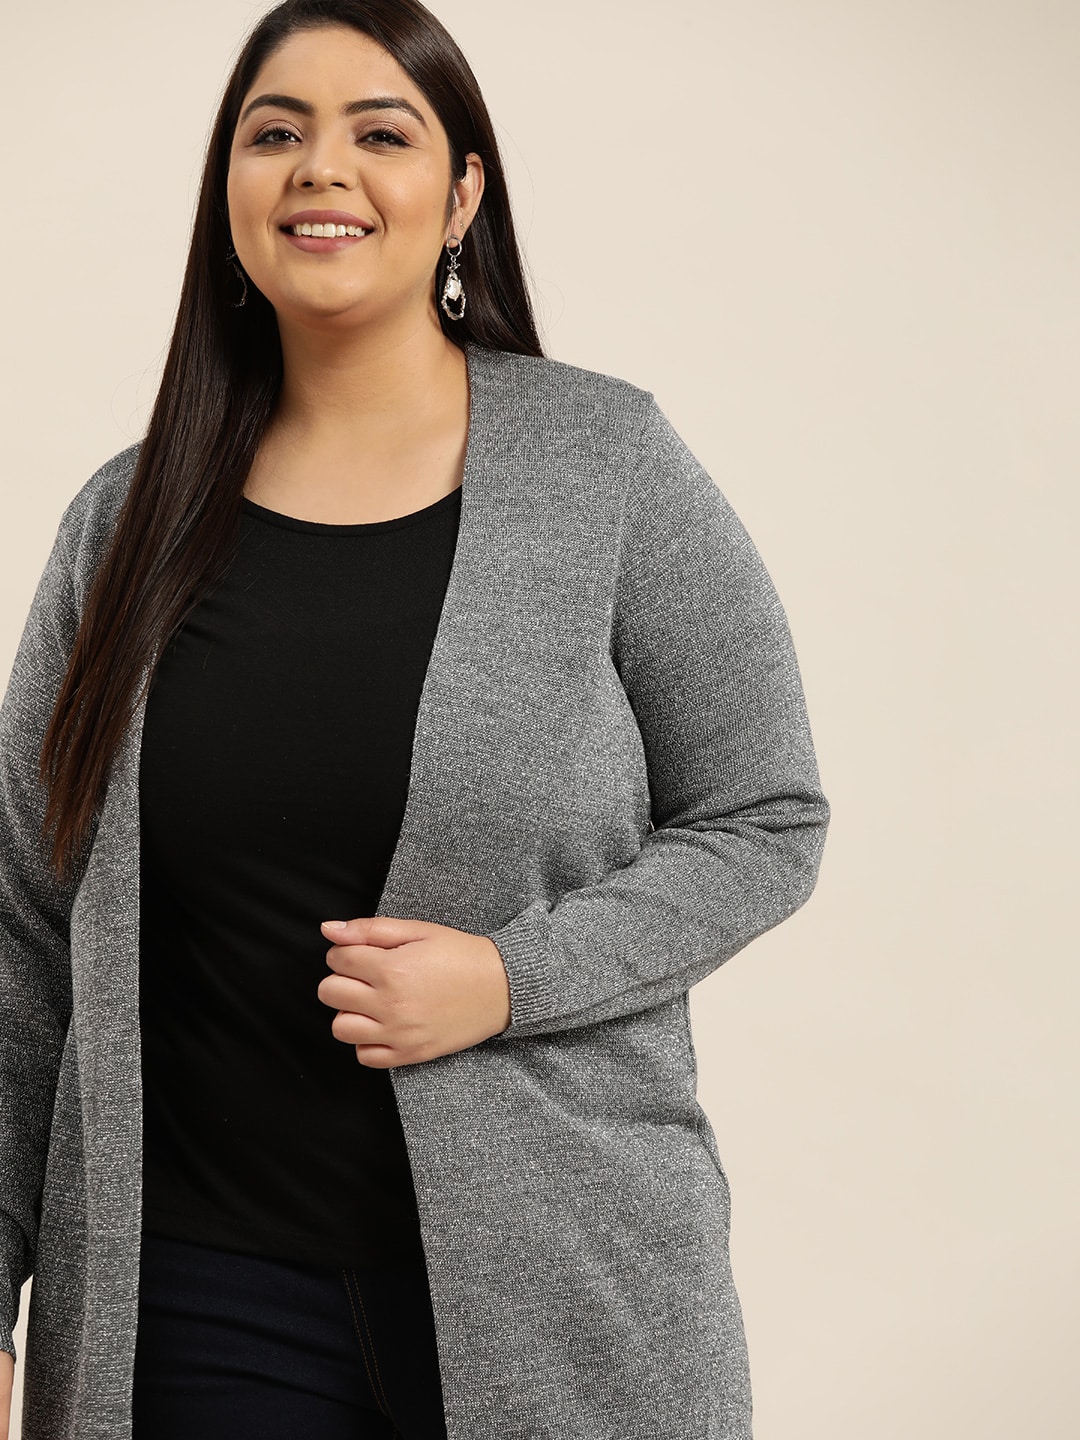 Sztori Women Plus Size Grey Melange Solid Front-Open Sweater with Glitter Details Price in India